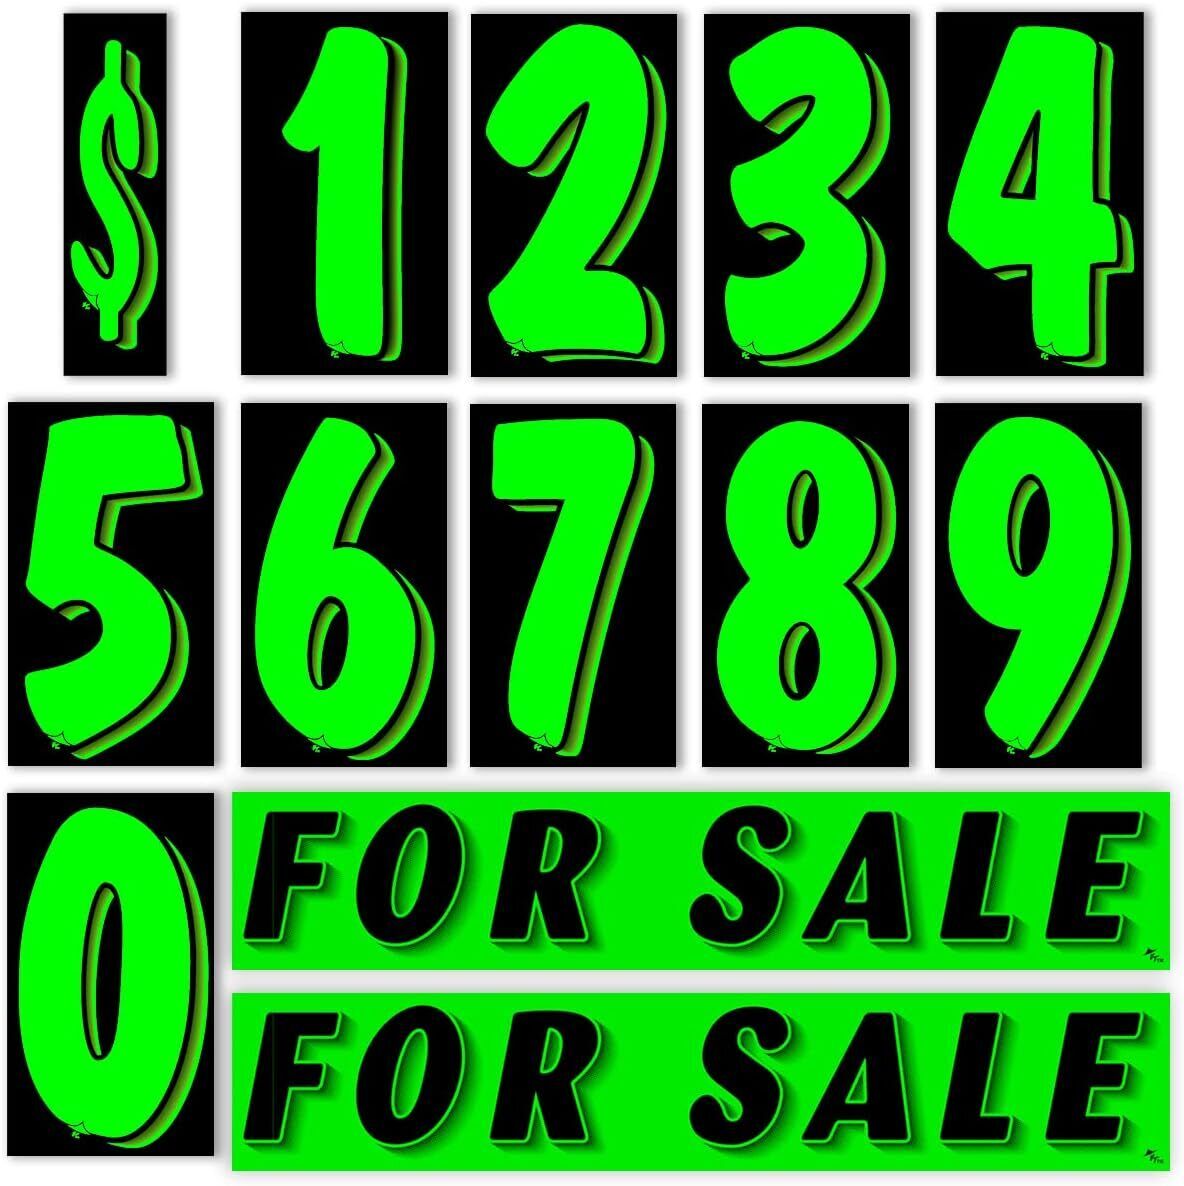 Vinyl Number and Decals 13 Dozen Car Lot Pricing Stickers (Green 2),